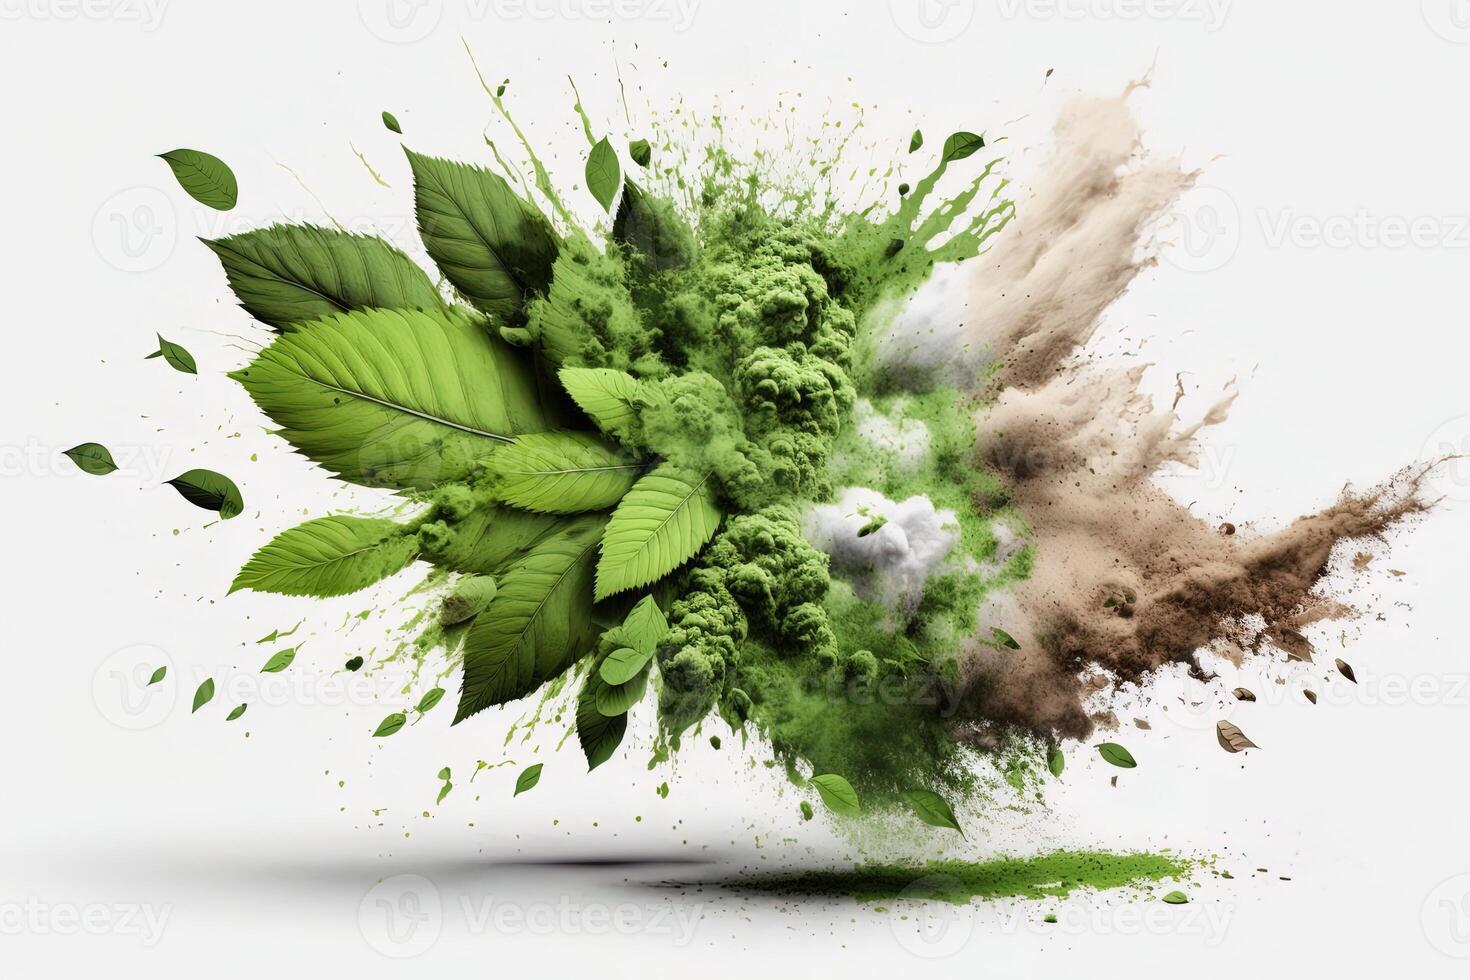 powder flavored explosion white background with kratom leafs mockup for matcha tea. photo